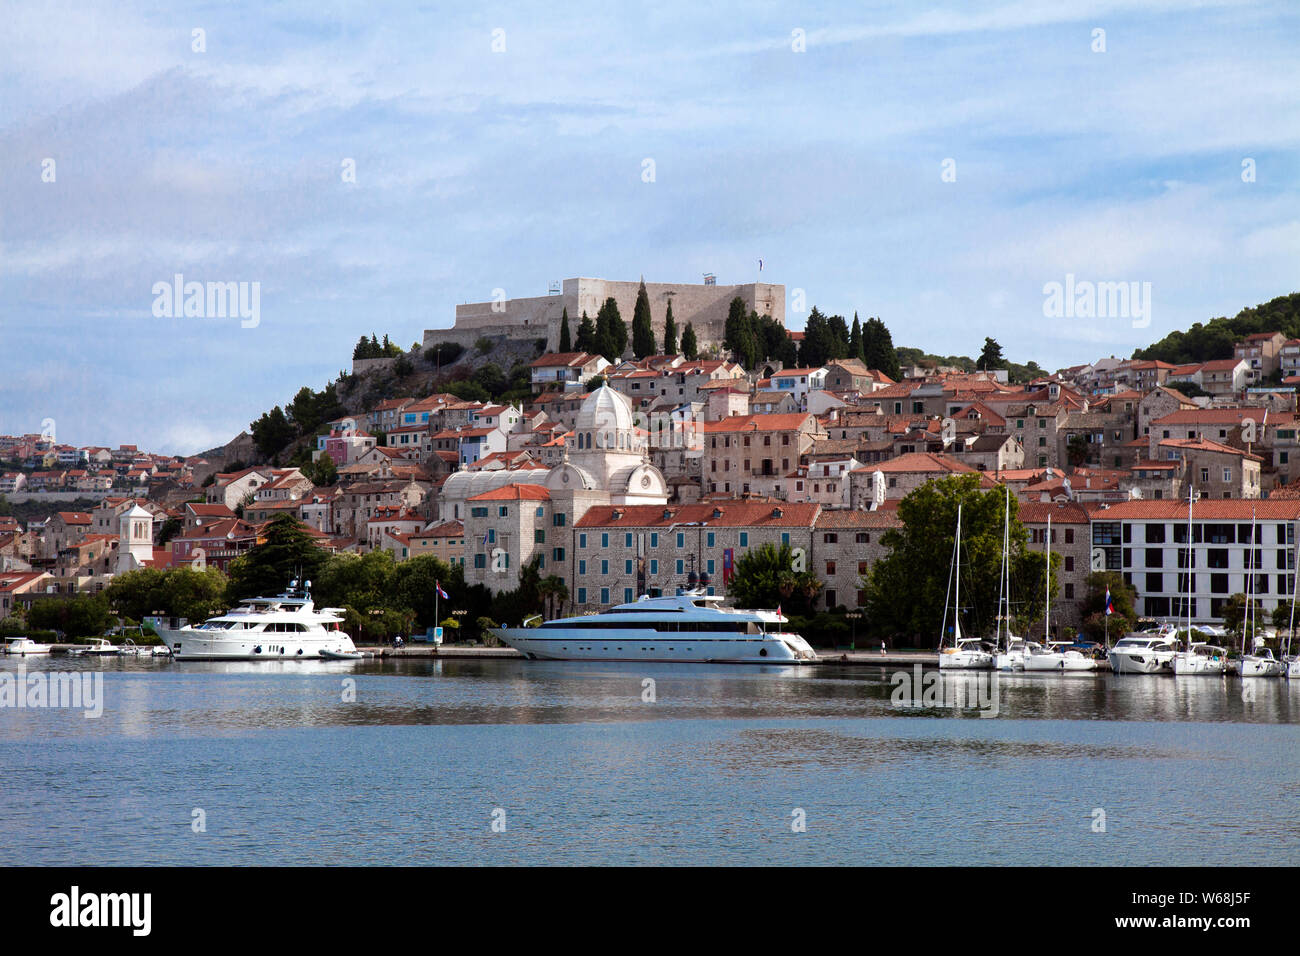 Sibenik, Croatia as seen from harbor approach. St. Michael's Fortress dominates the skyline, thought to date to the late 8th or early 9th century. Stock Photo